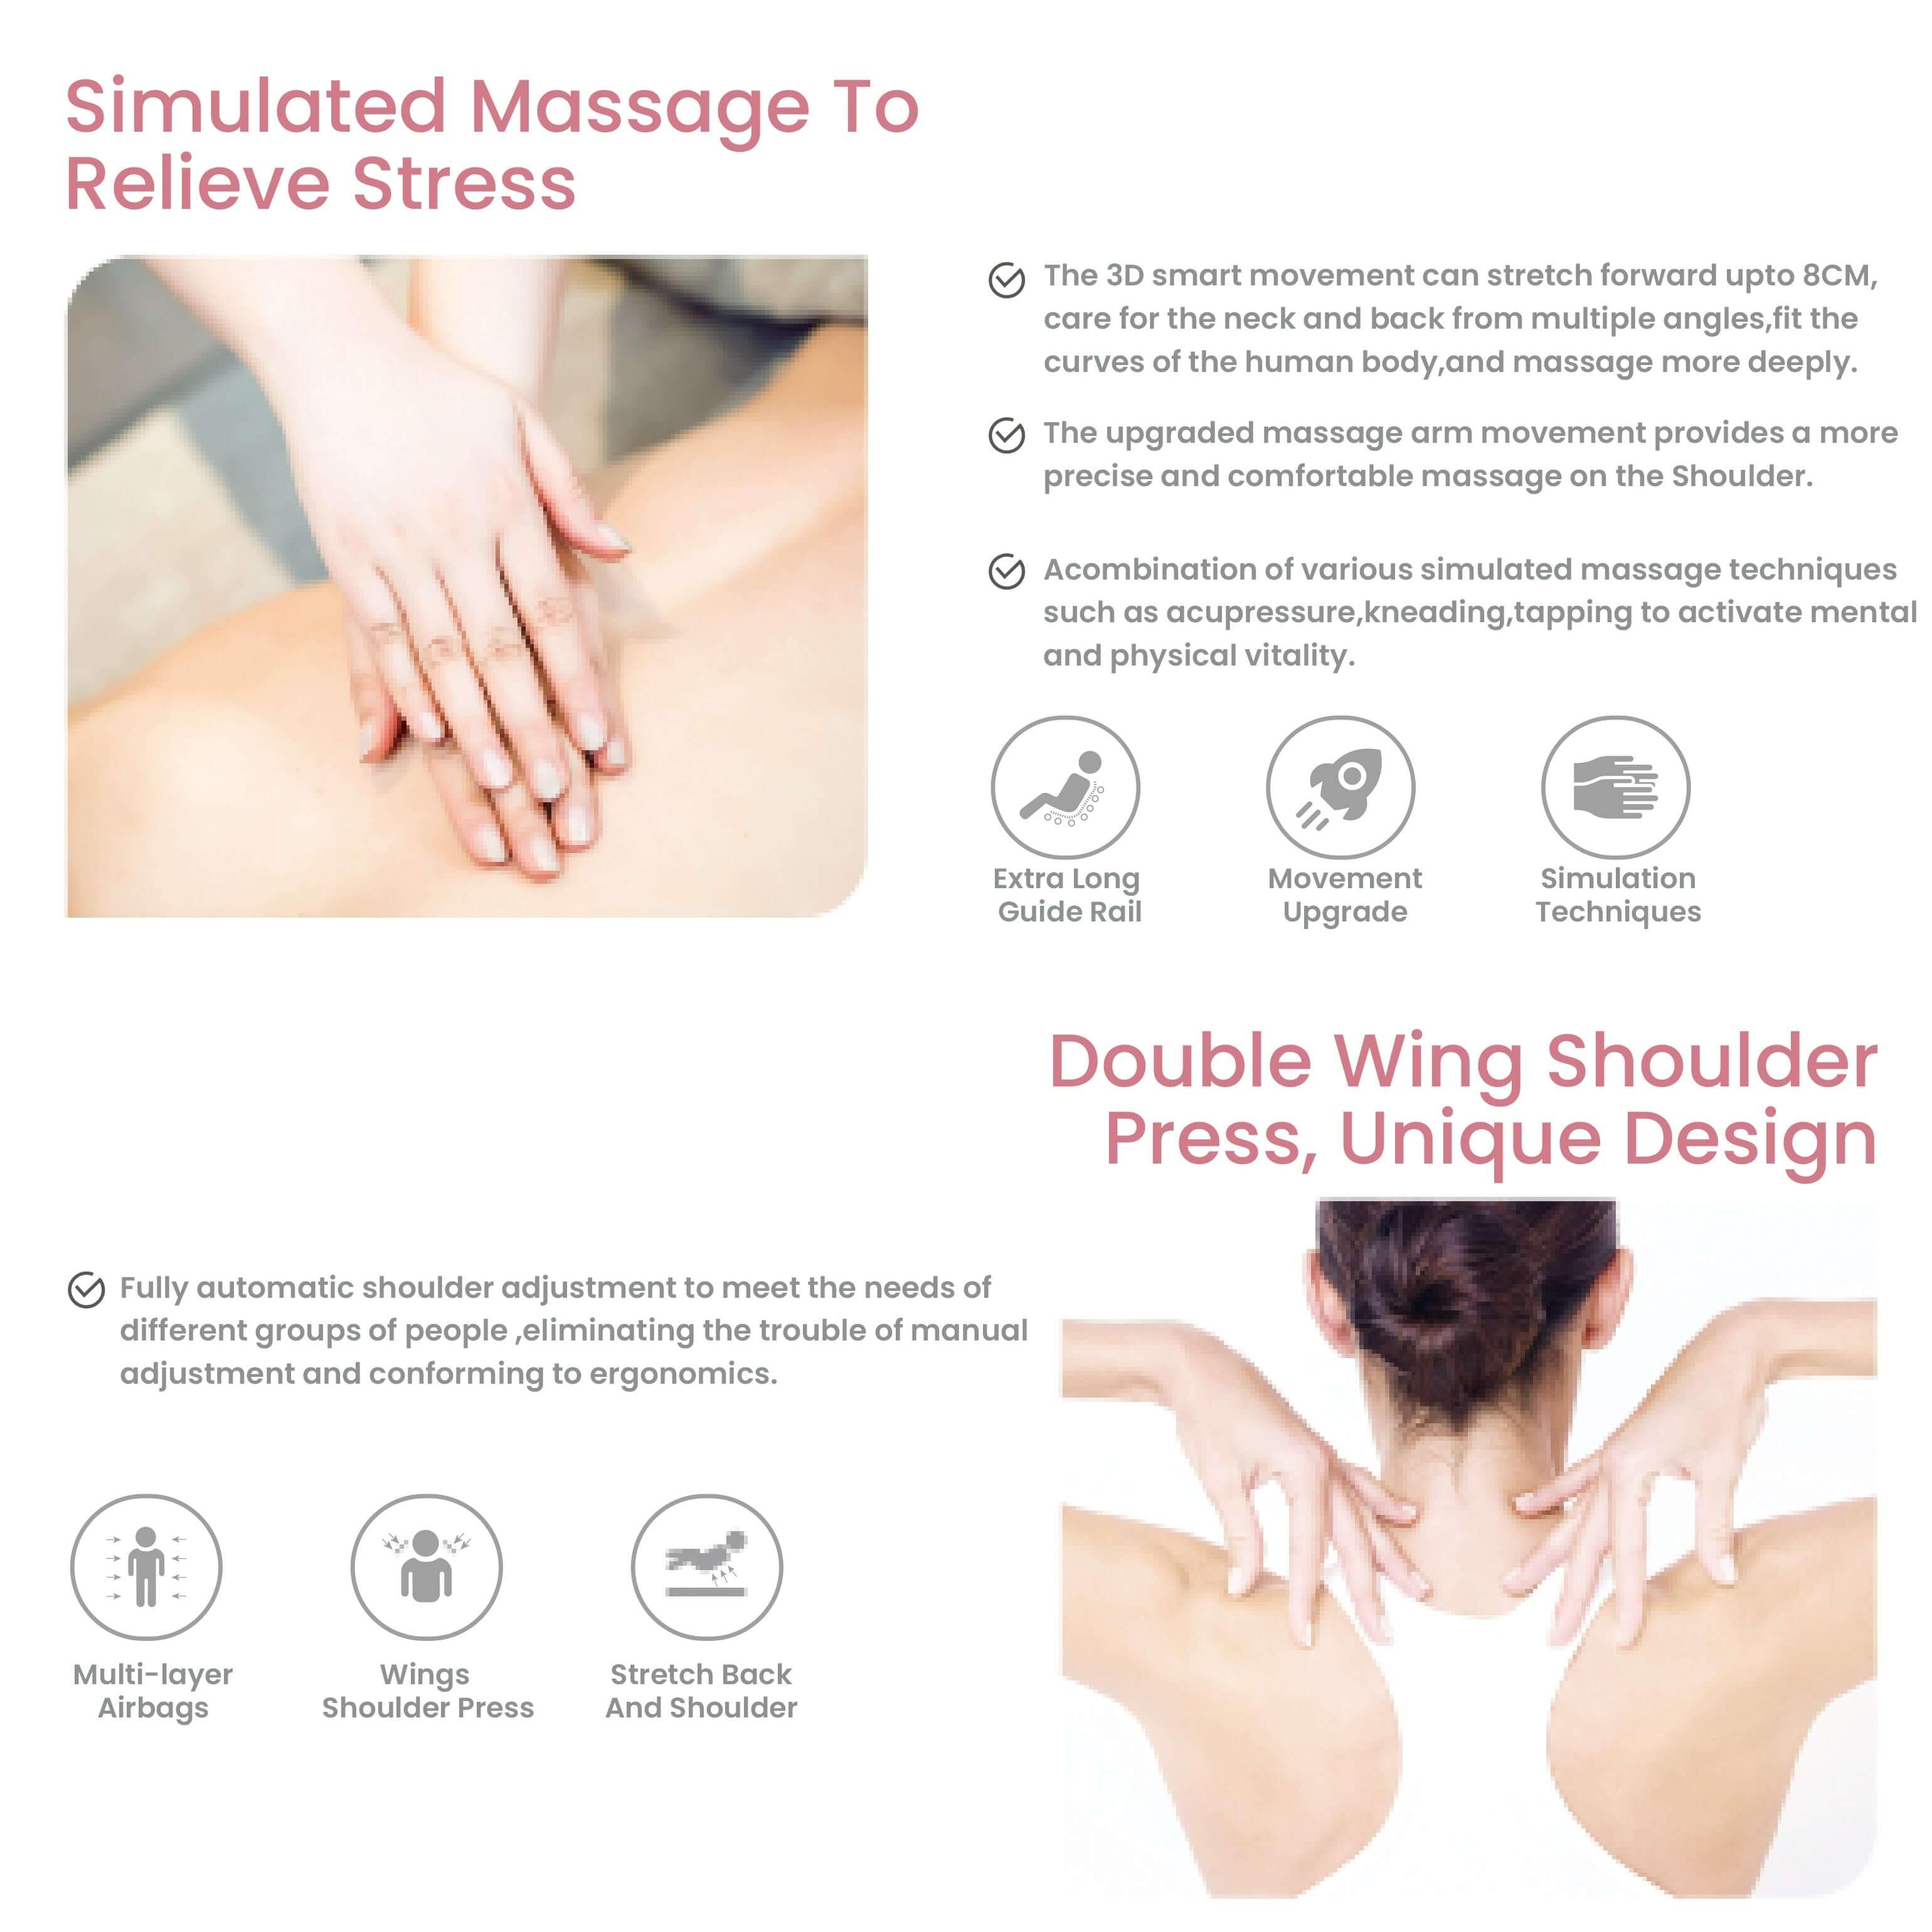 Simulated massage to relieve stress and unique double wing shoulder press design on massage chair. best massage chair uae, massage chair Dubai, massage chair uae, massage chair Saudi Arabia, كرسي التدليك, Best massage chair in Dubai UAE, buy massage chair